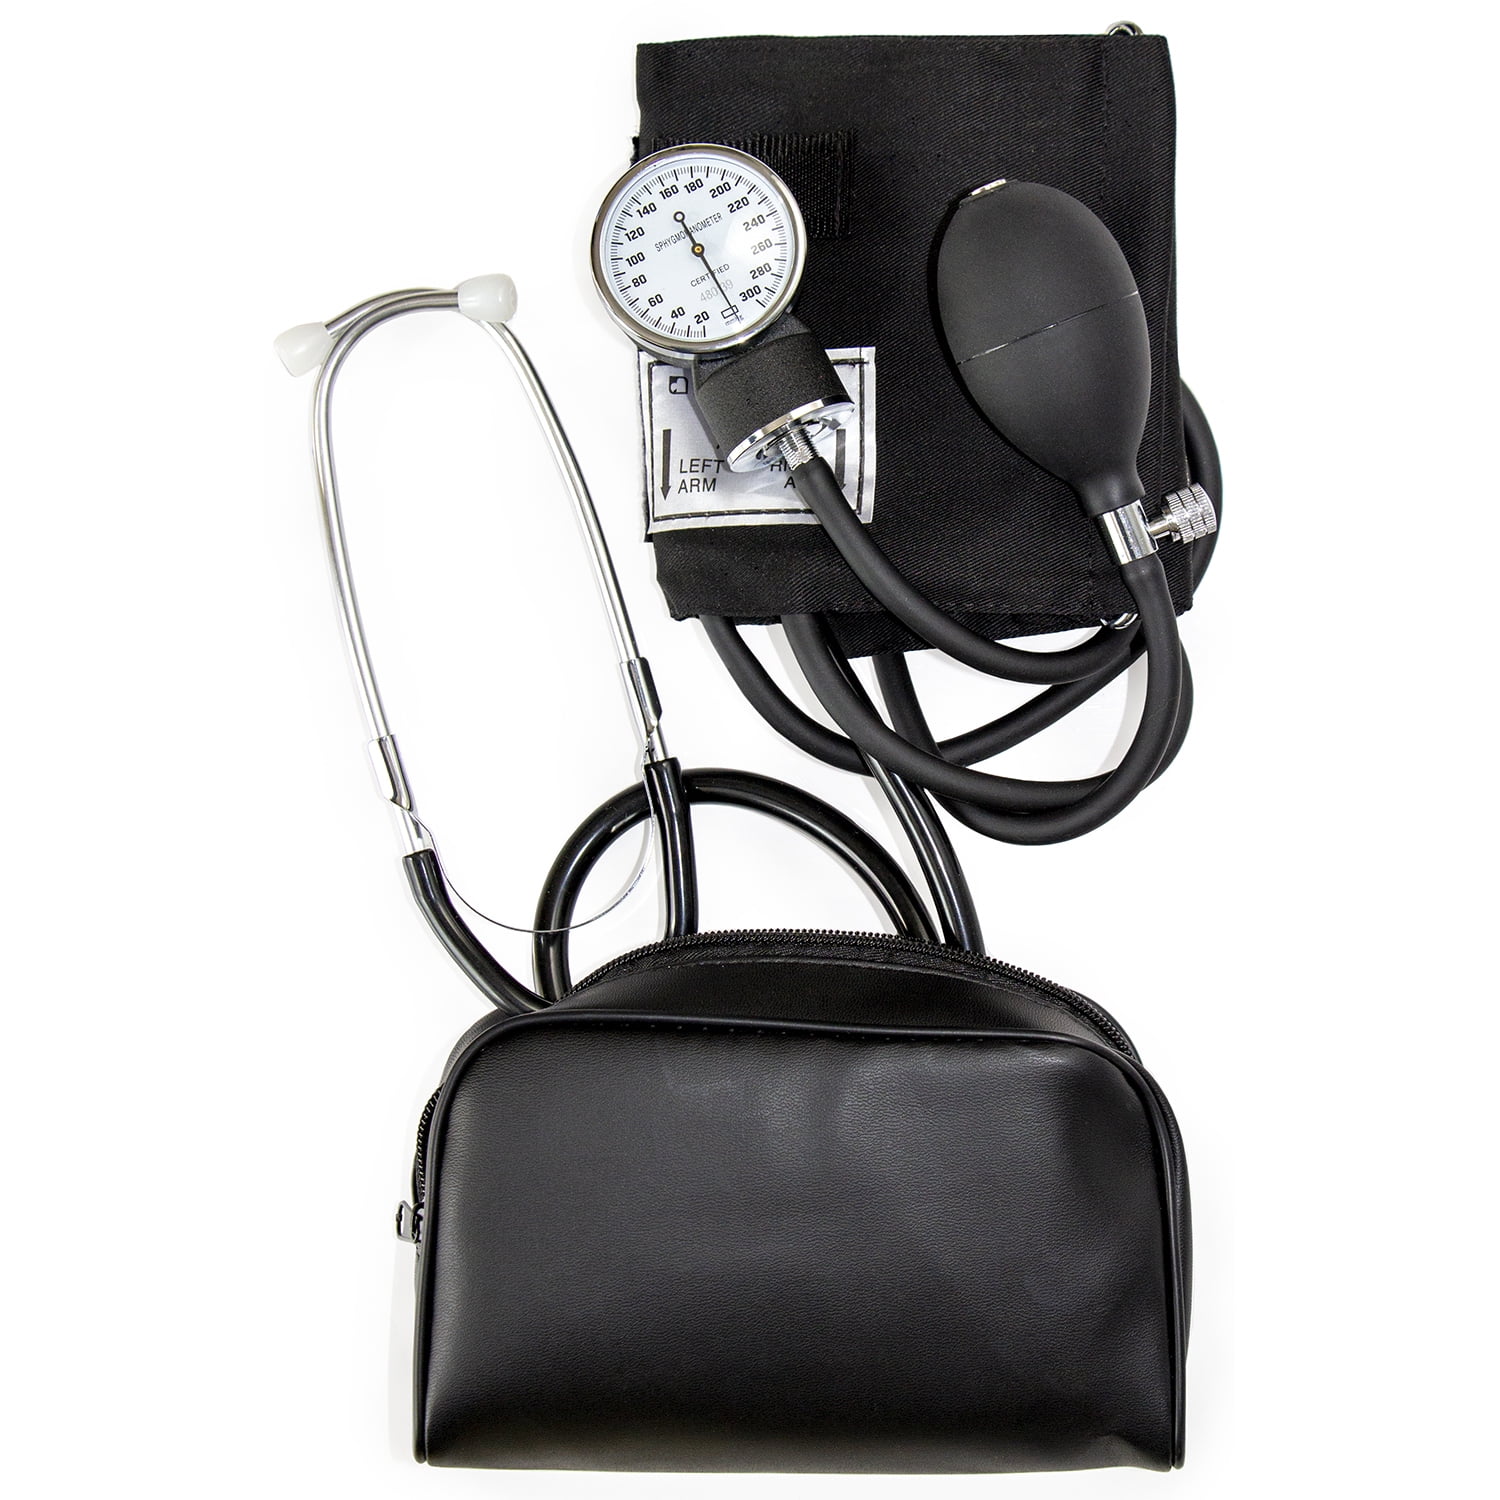 Automatic blood pressure monitor - Healthmate® - Prestige Medical - arm /  with rechargeable battery / with adult cuff